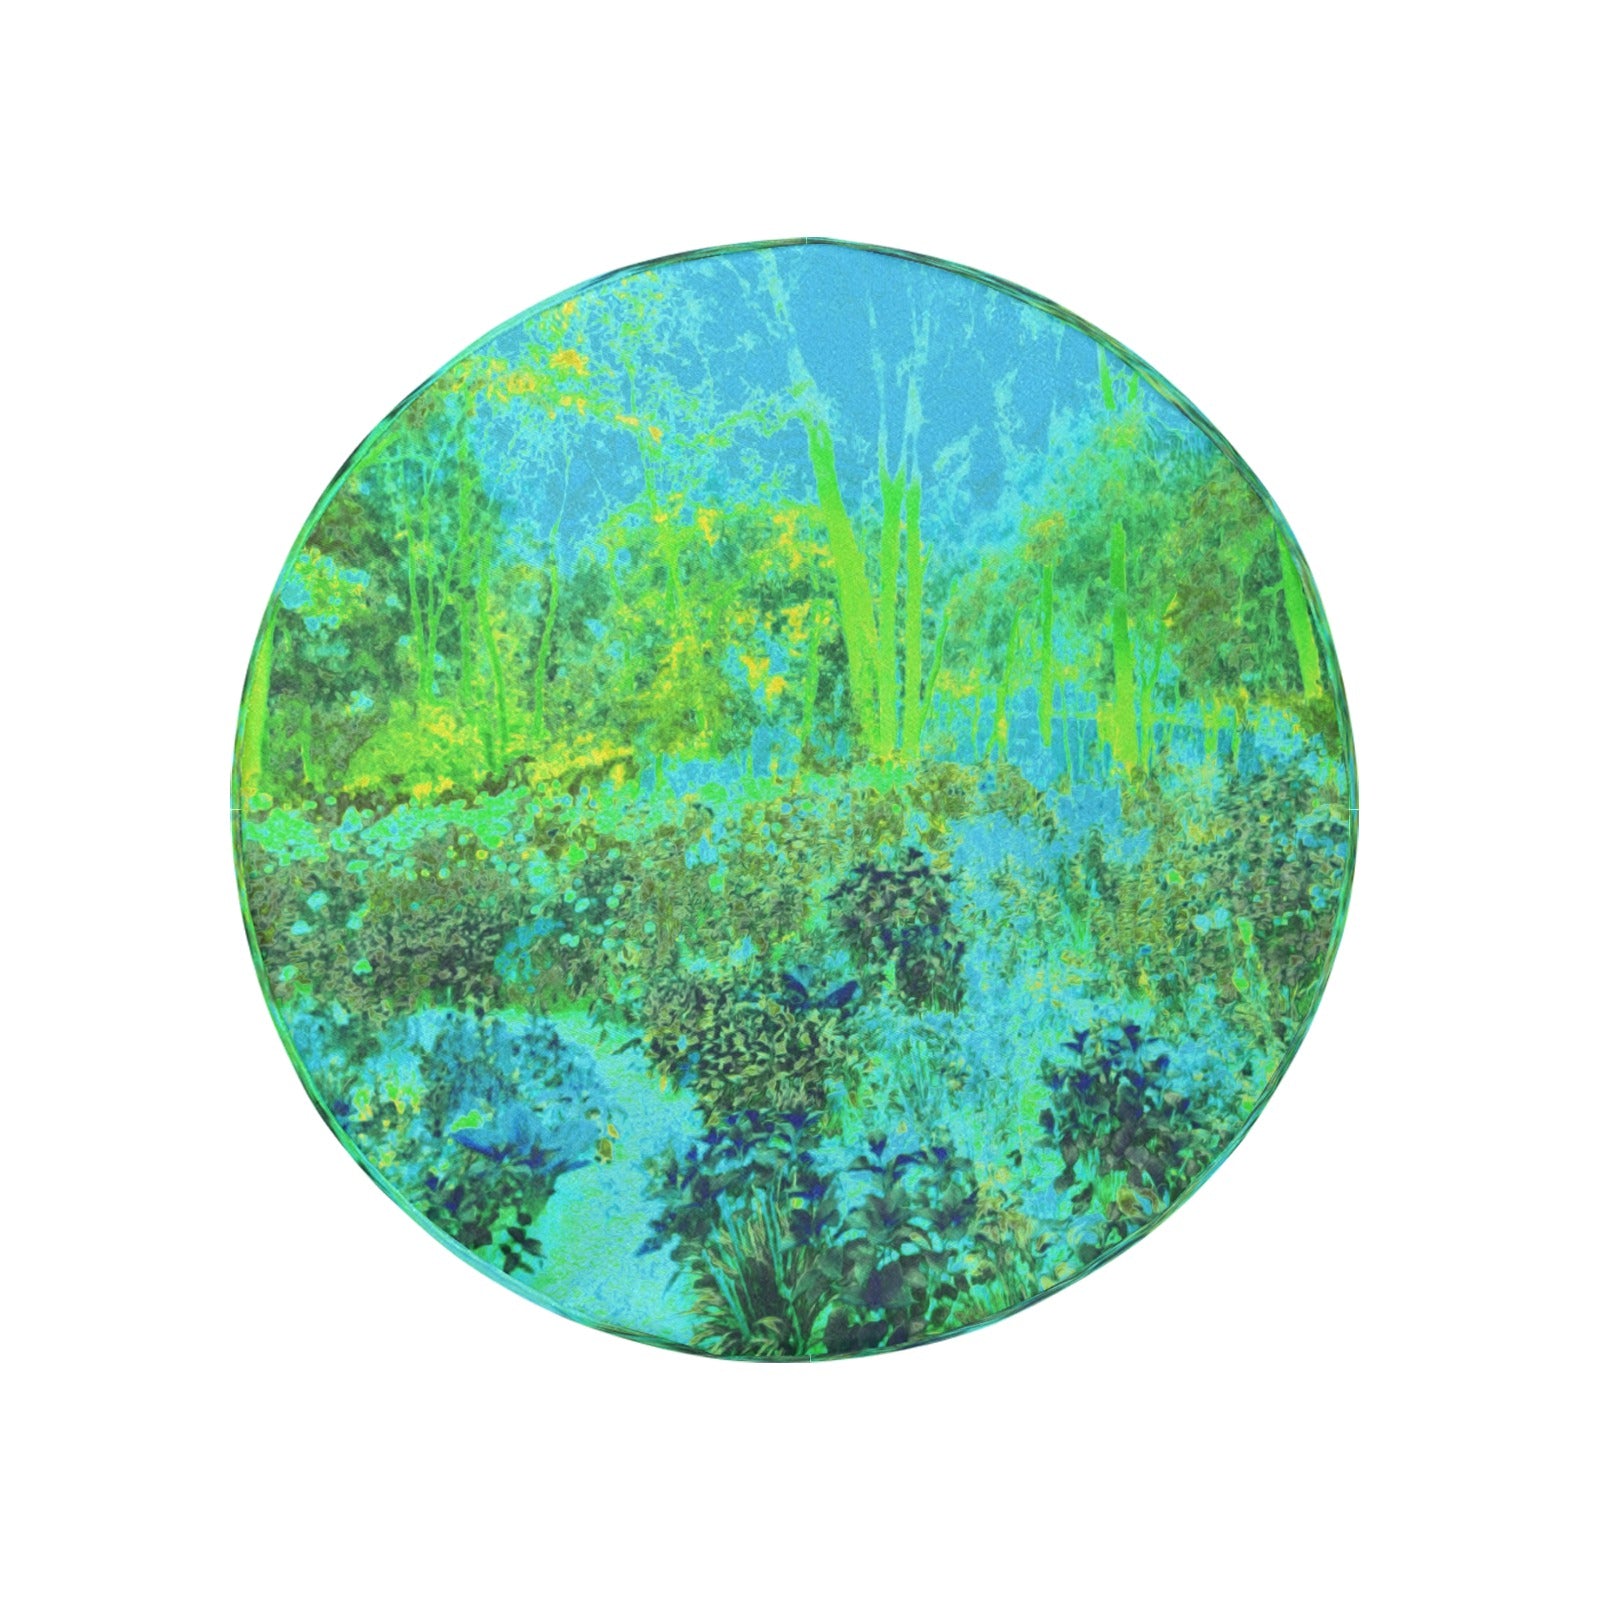 Spare Tire Covers, Trippy Lime Green and Blue Impressionistic Landscape - Medium